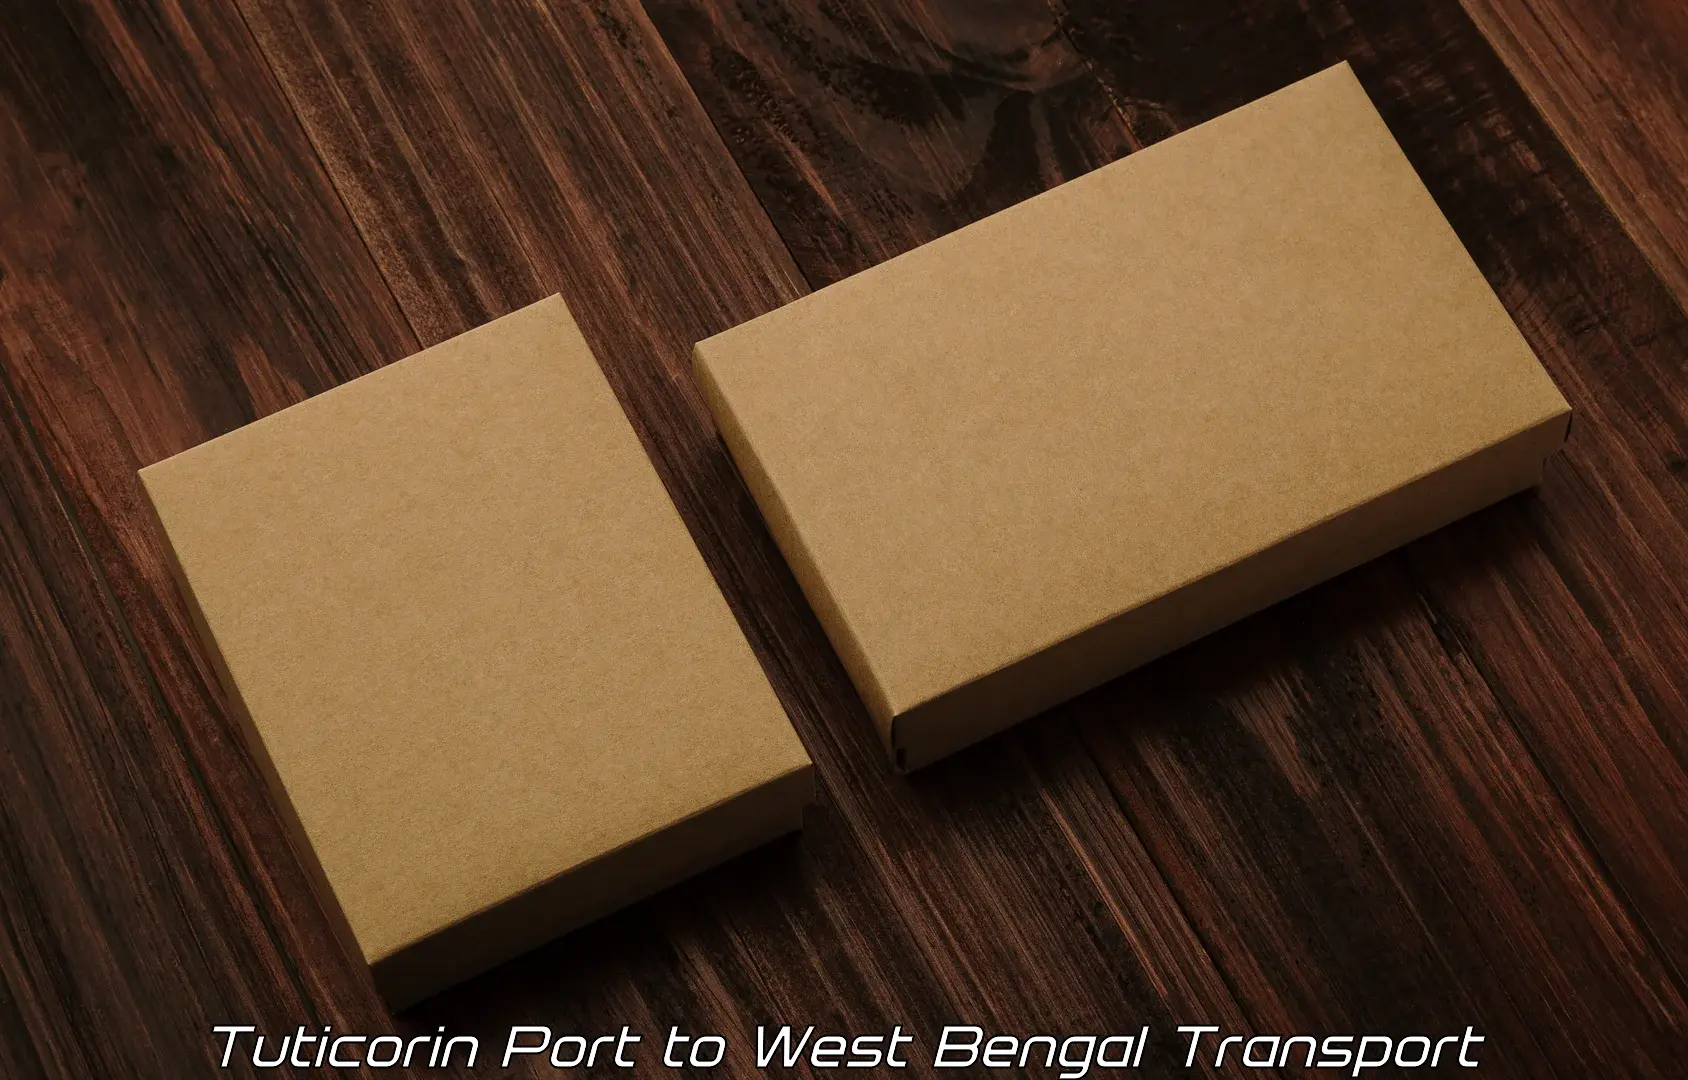 Online transport booking Tuticorin Port to West Bengal